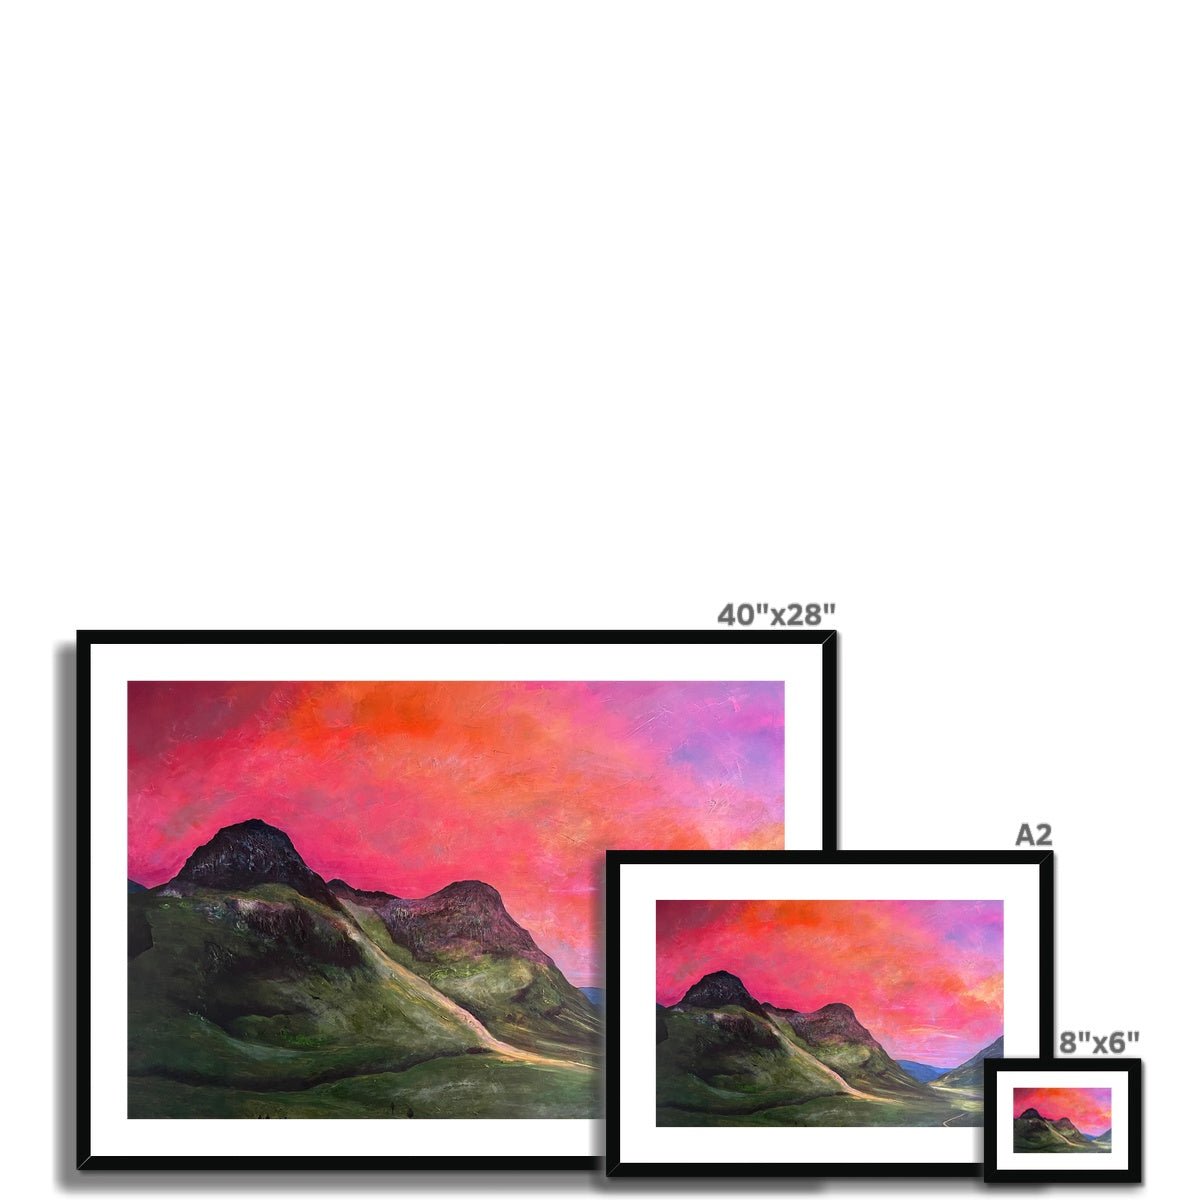 Glencoe Dusk Painting | Framed & Mounted Prints From Scotland-Framed & Mounted Prints-Glencoe Art Gallery-Paintings, Prints, Homeware, Art Gifts From Scotland By Scottish Artist Kevin Hunter